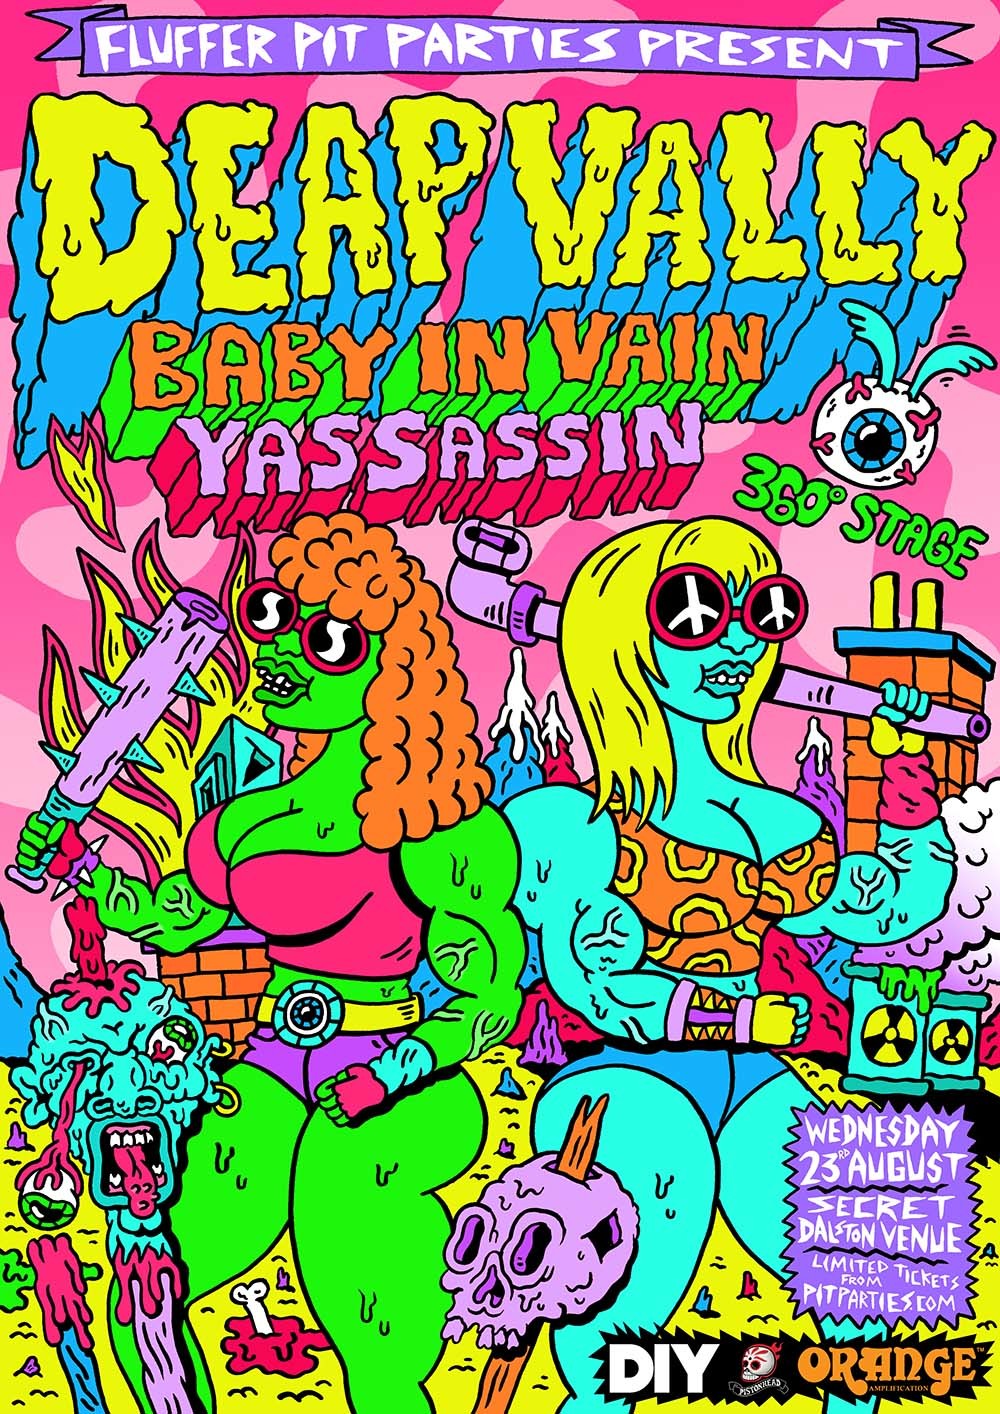 Baby in Vain and Yassassin join Deap Vally's Fluffer Pit Party